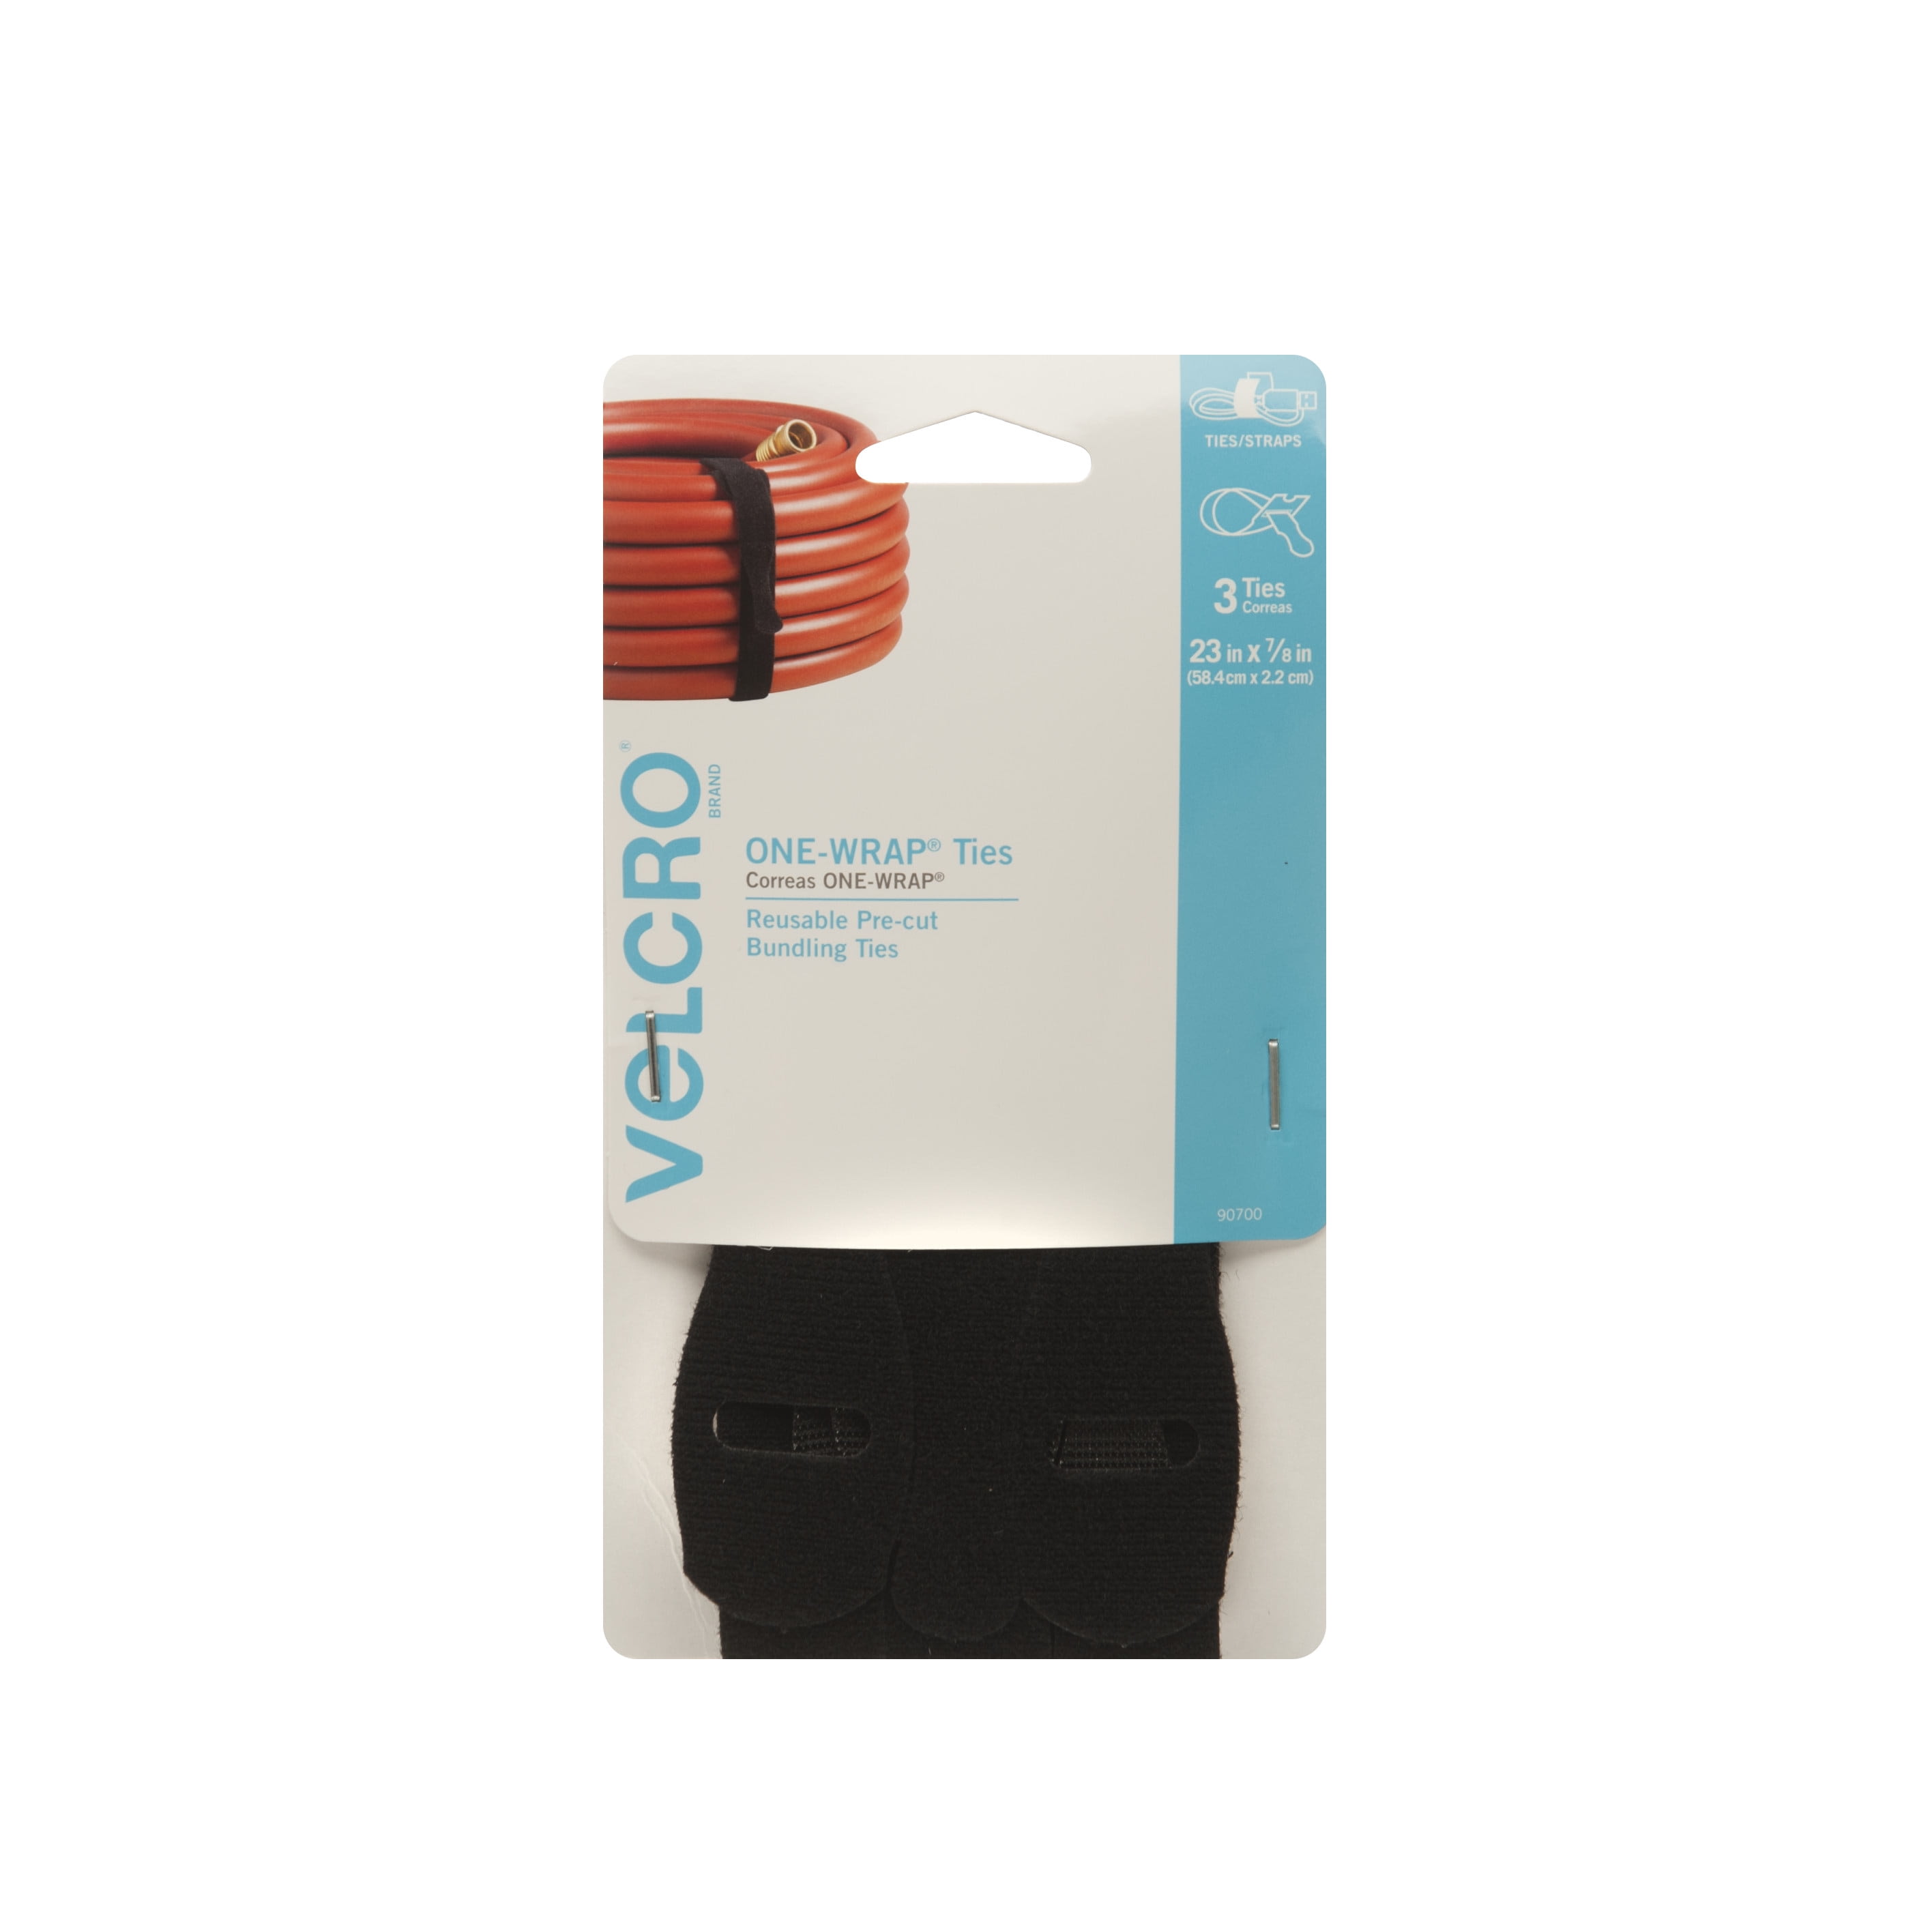 VELCRO One-Wrap Cable Ties, Black Cord Organization Straps, Thin Pre-Cut  Design, 23 x 7/8 3 Count - DroneUp Delivery